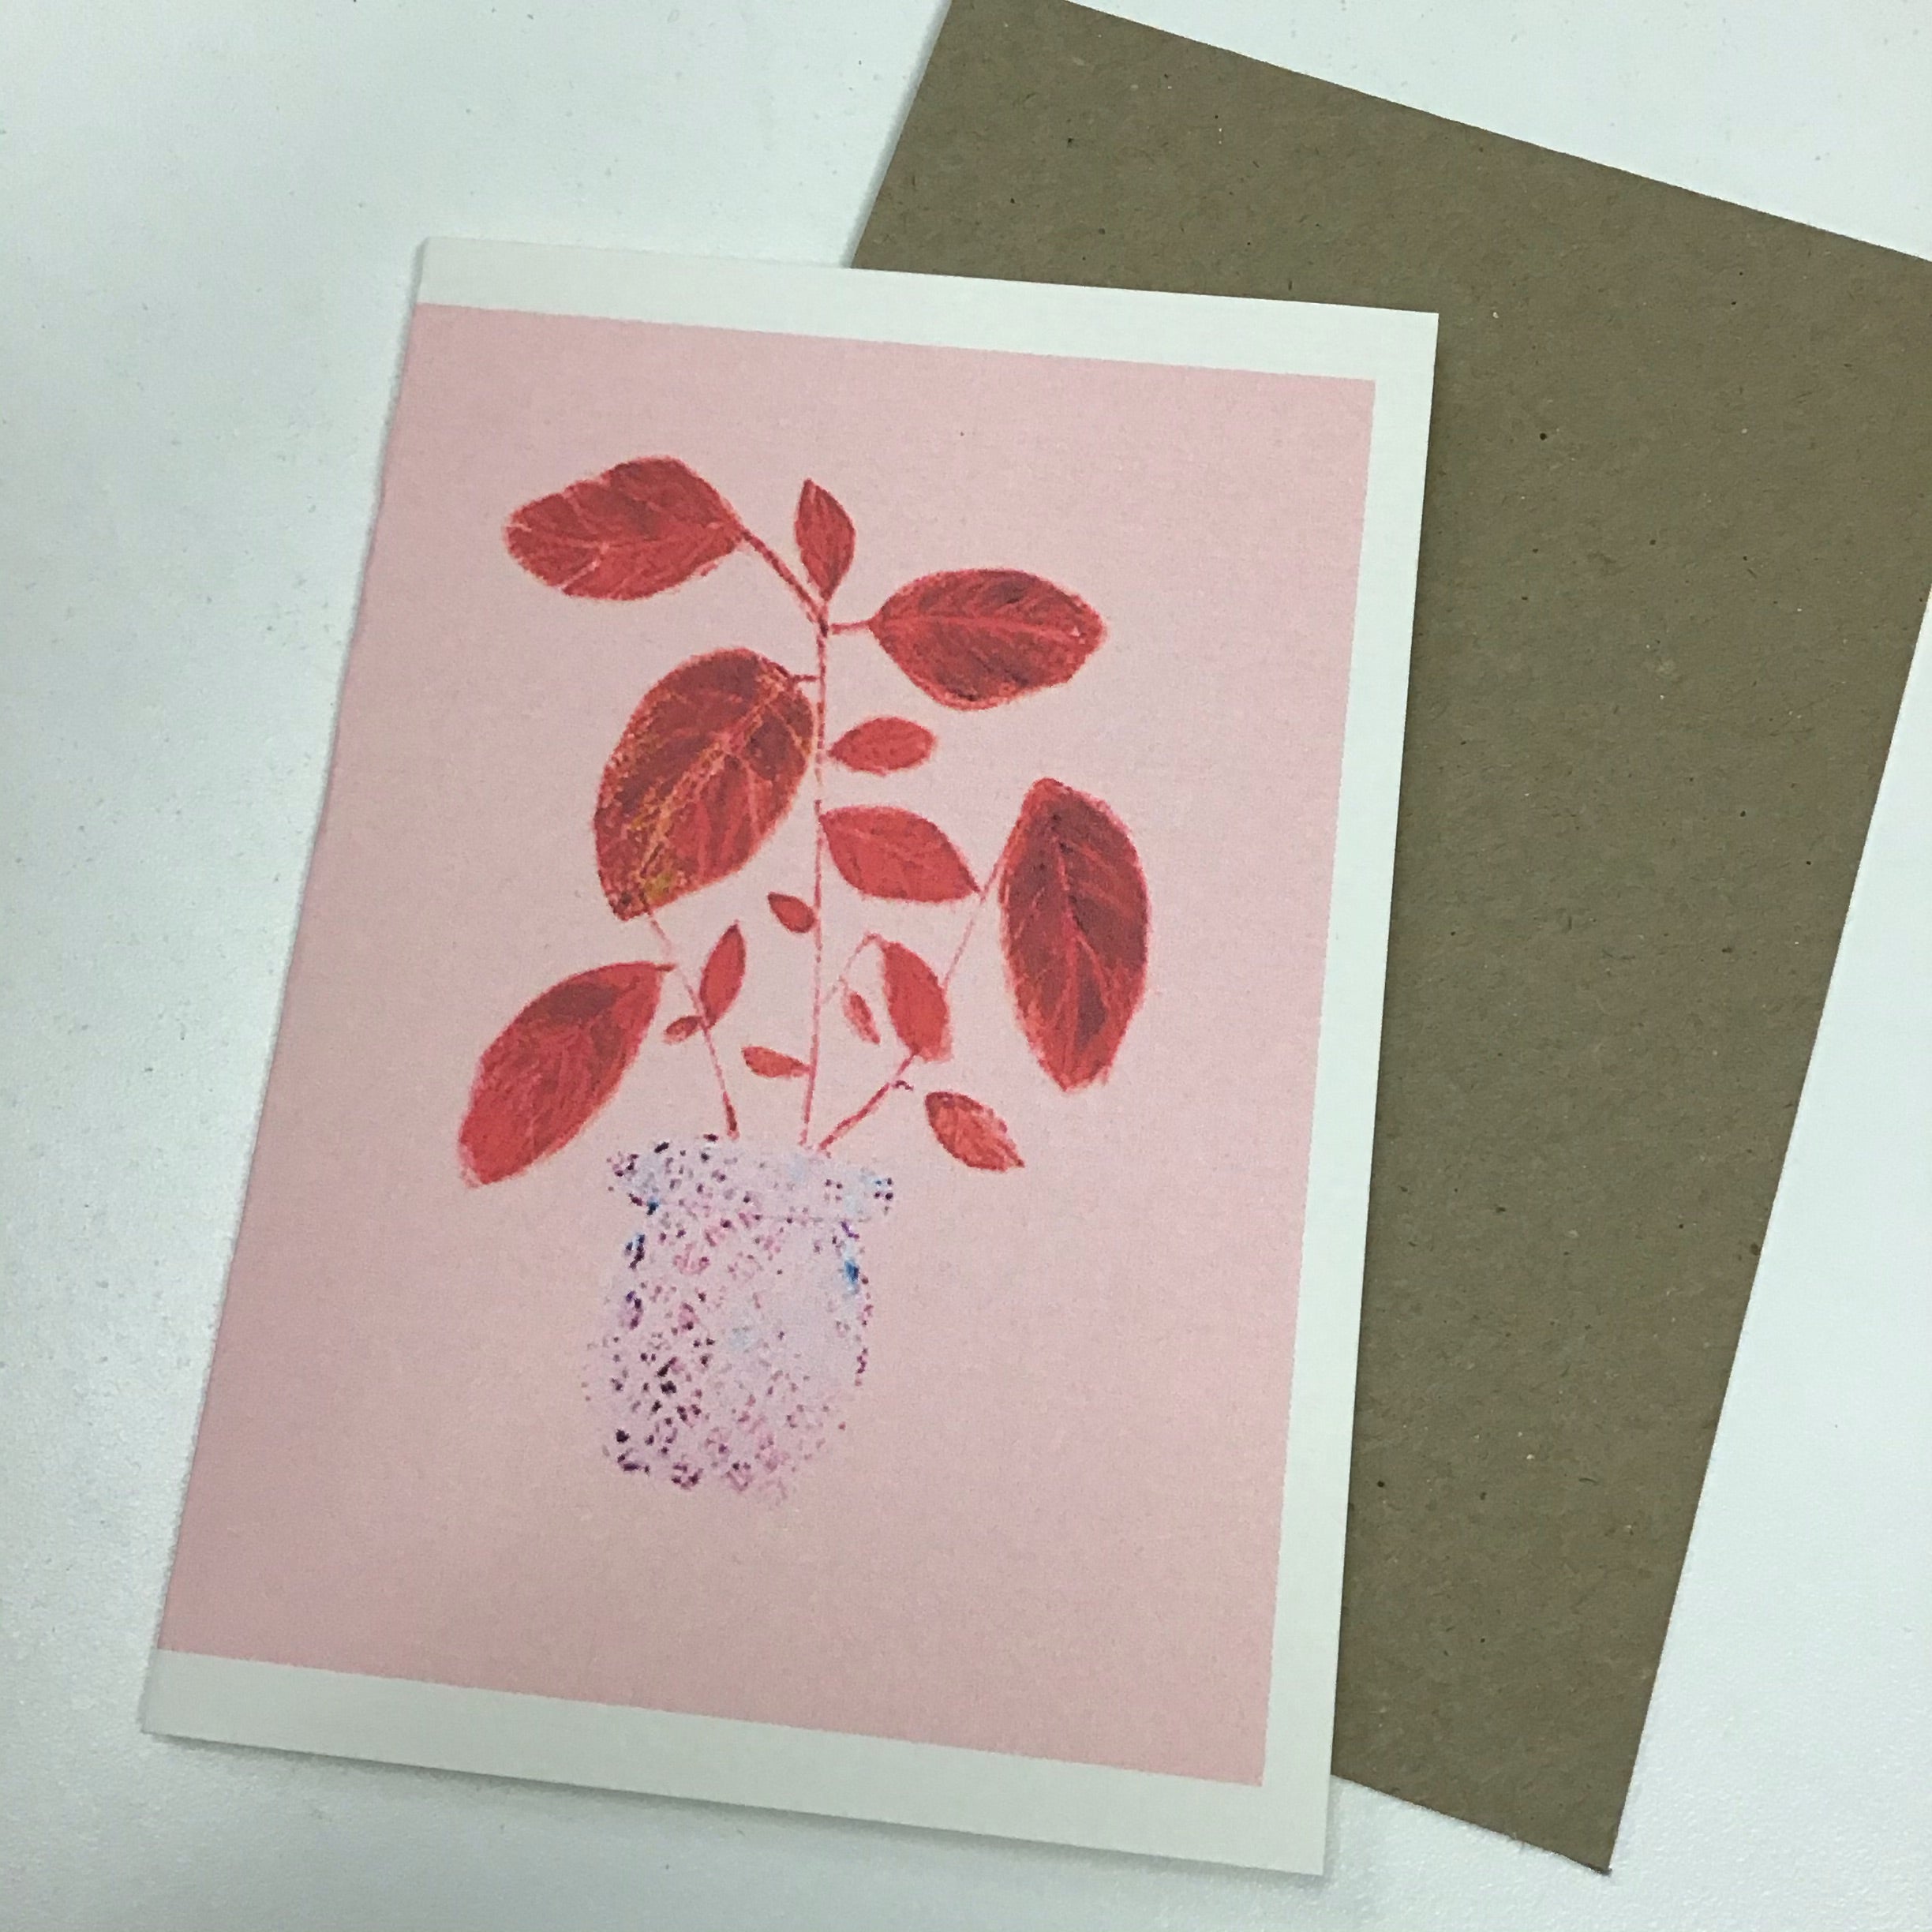 Mixed Media Recycled A6 Art Print Greeting Cards with Envelopes